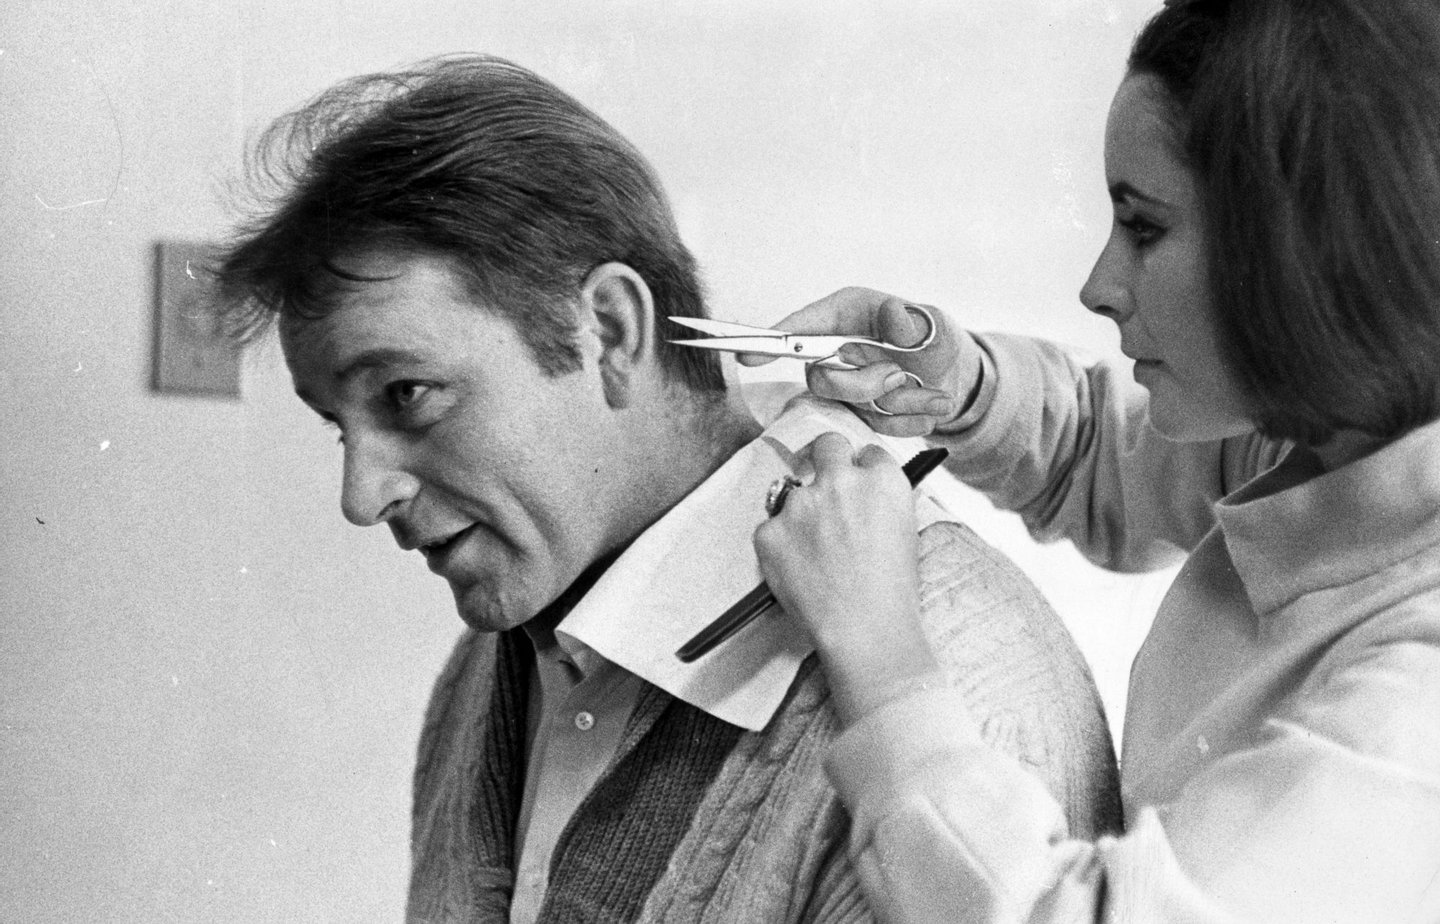 6th March 1964: Elizabeth Taylor gives her future husband Richard Burton (1925-1984) a cursory haircut. (Photo by William Lovelace/Express/Getty Images)